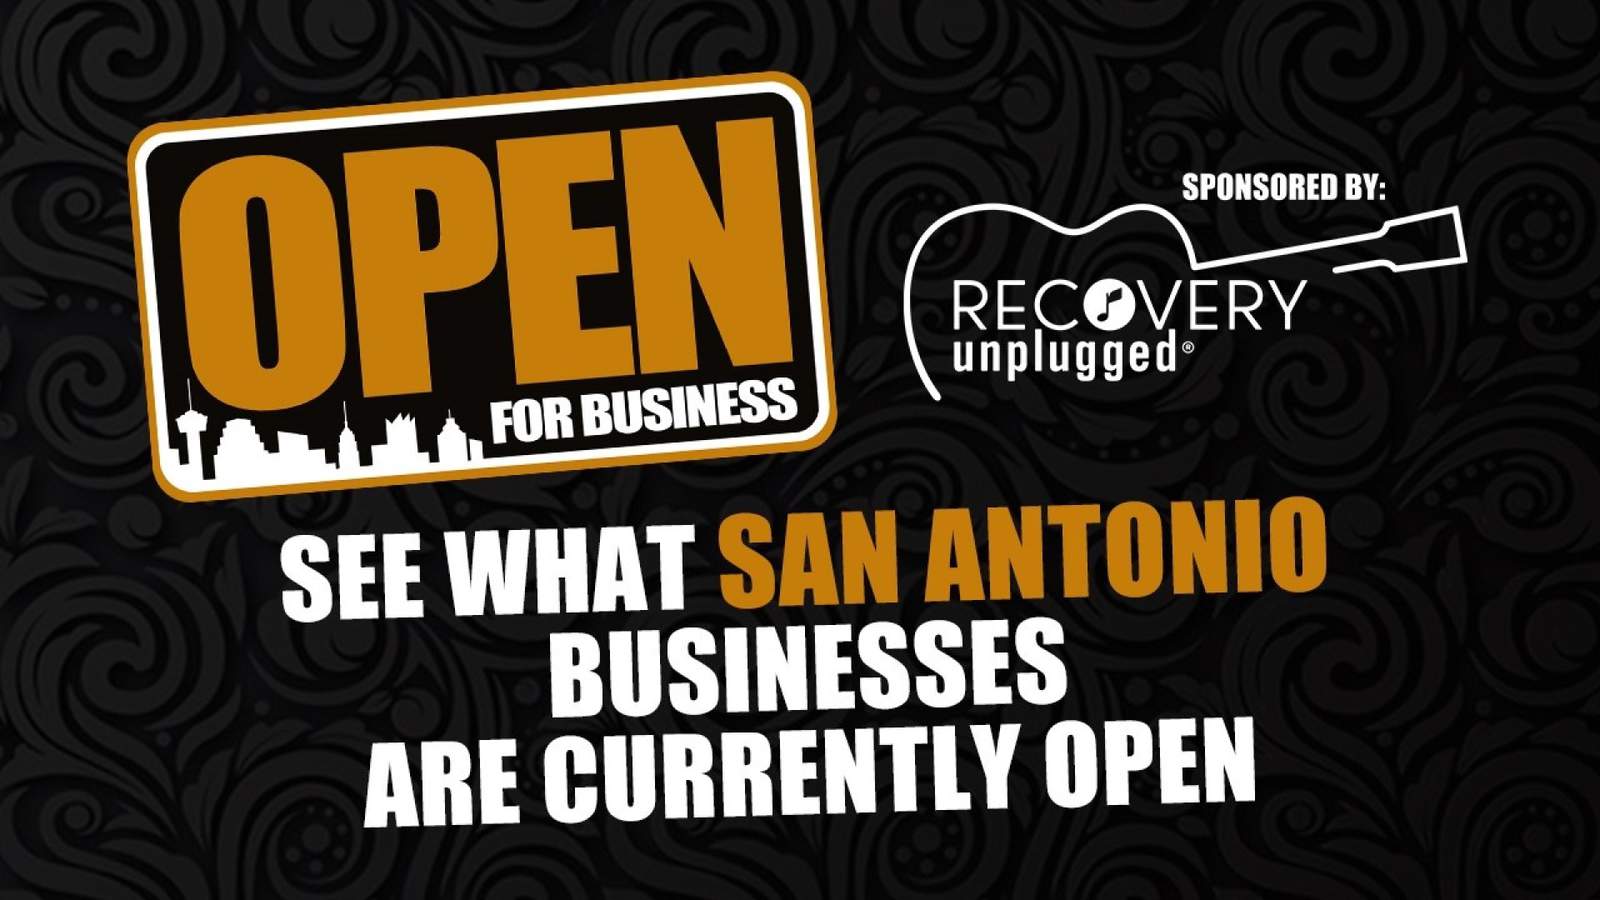 Are you open for business?